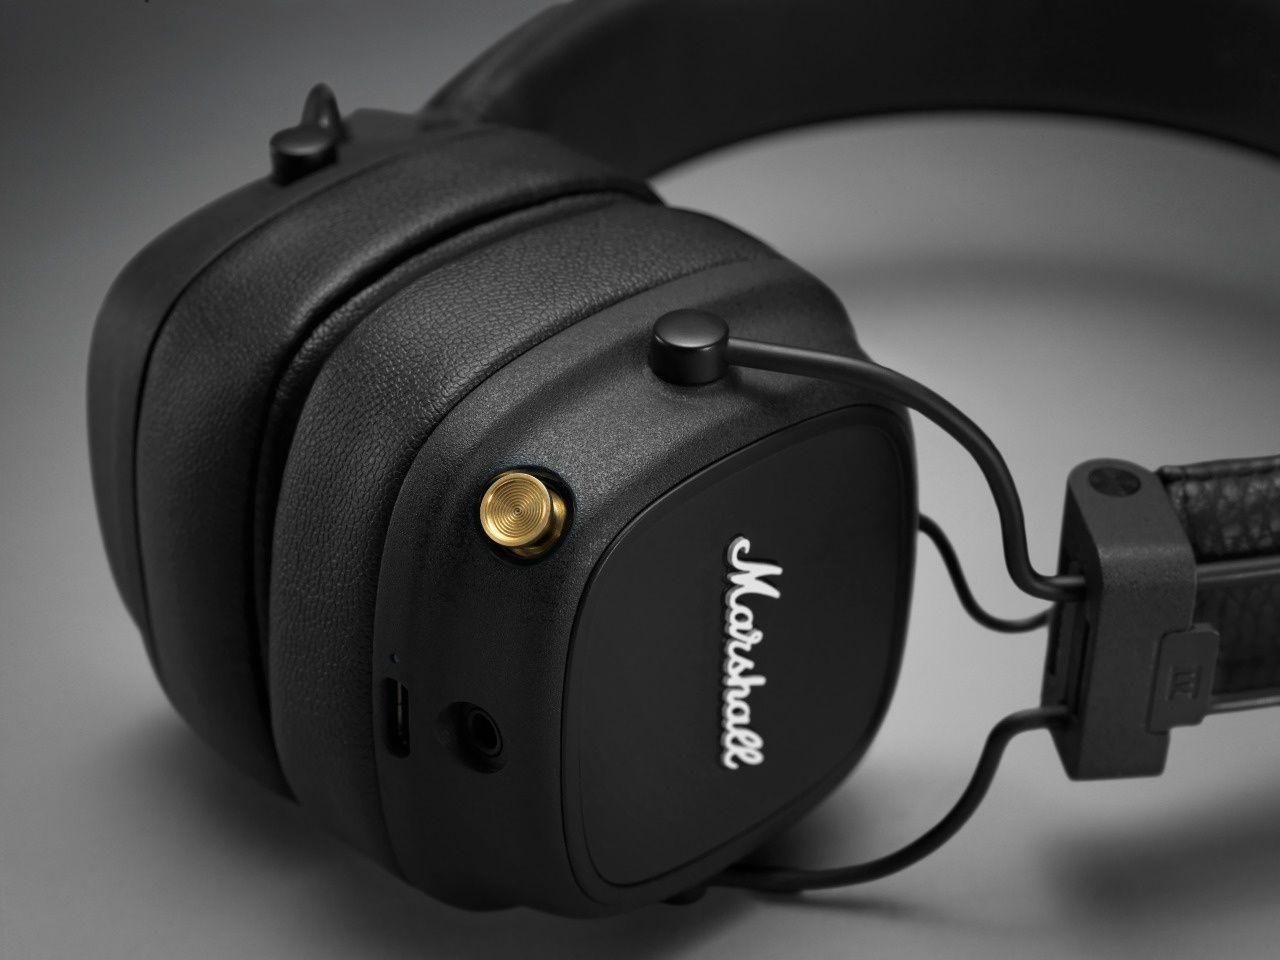 Marshall Major IV headphones run for 80+ hours on one charge